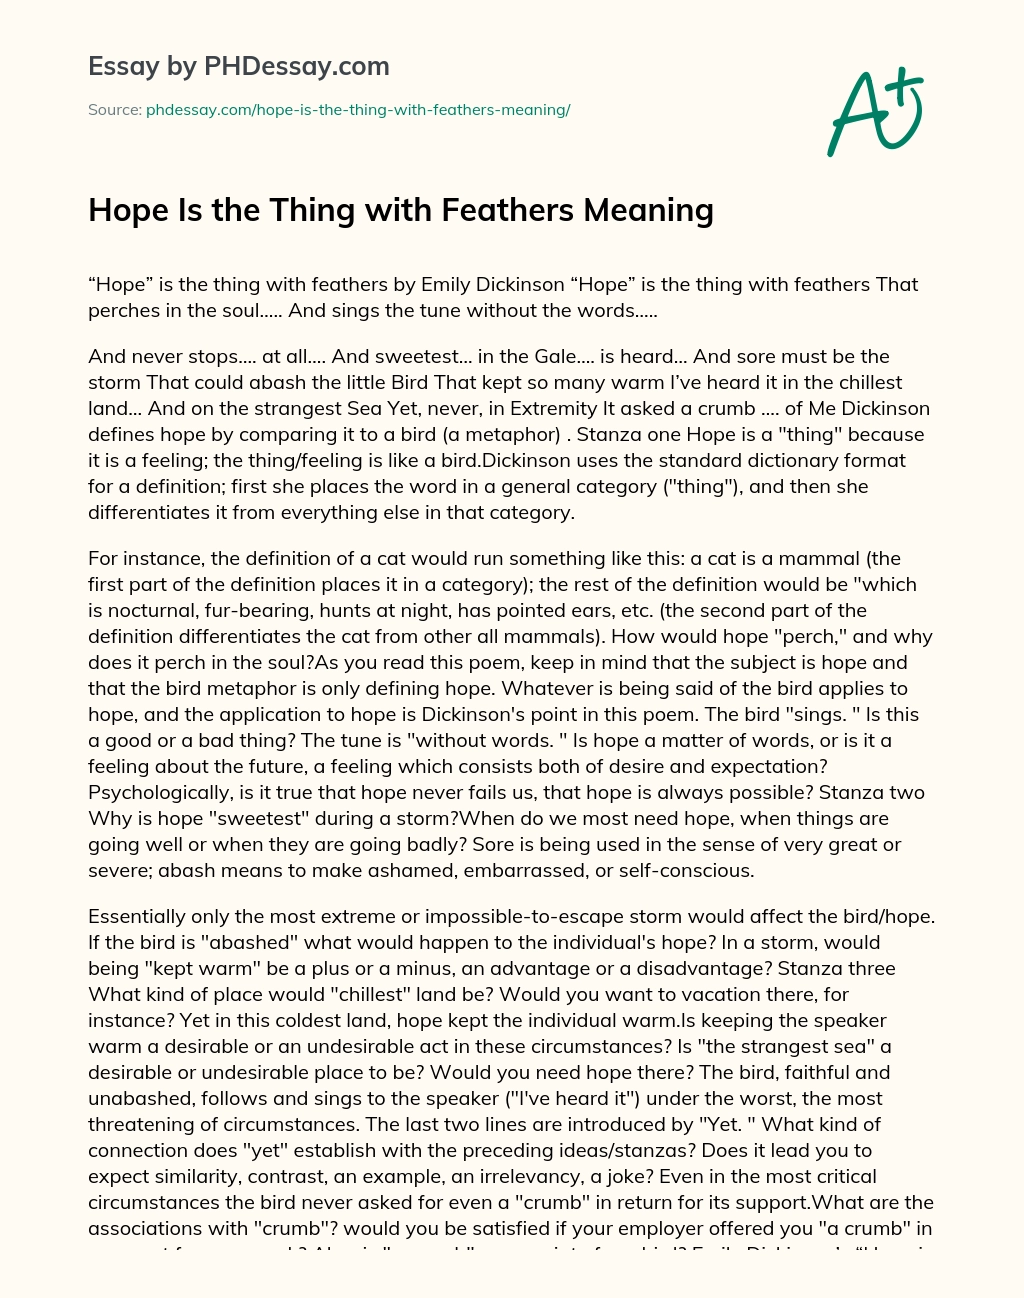 Hope Is the Thing with Feathers Meaning essay